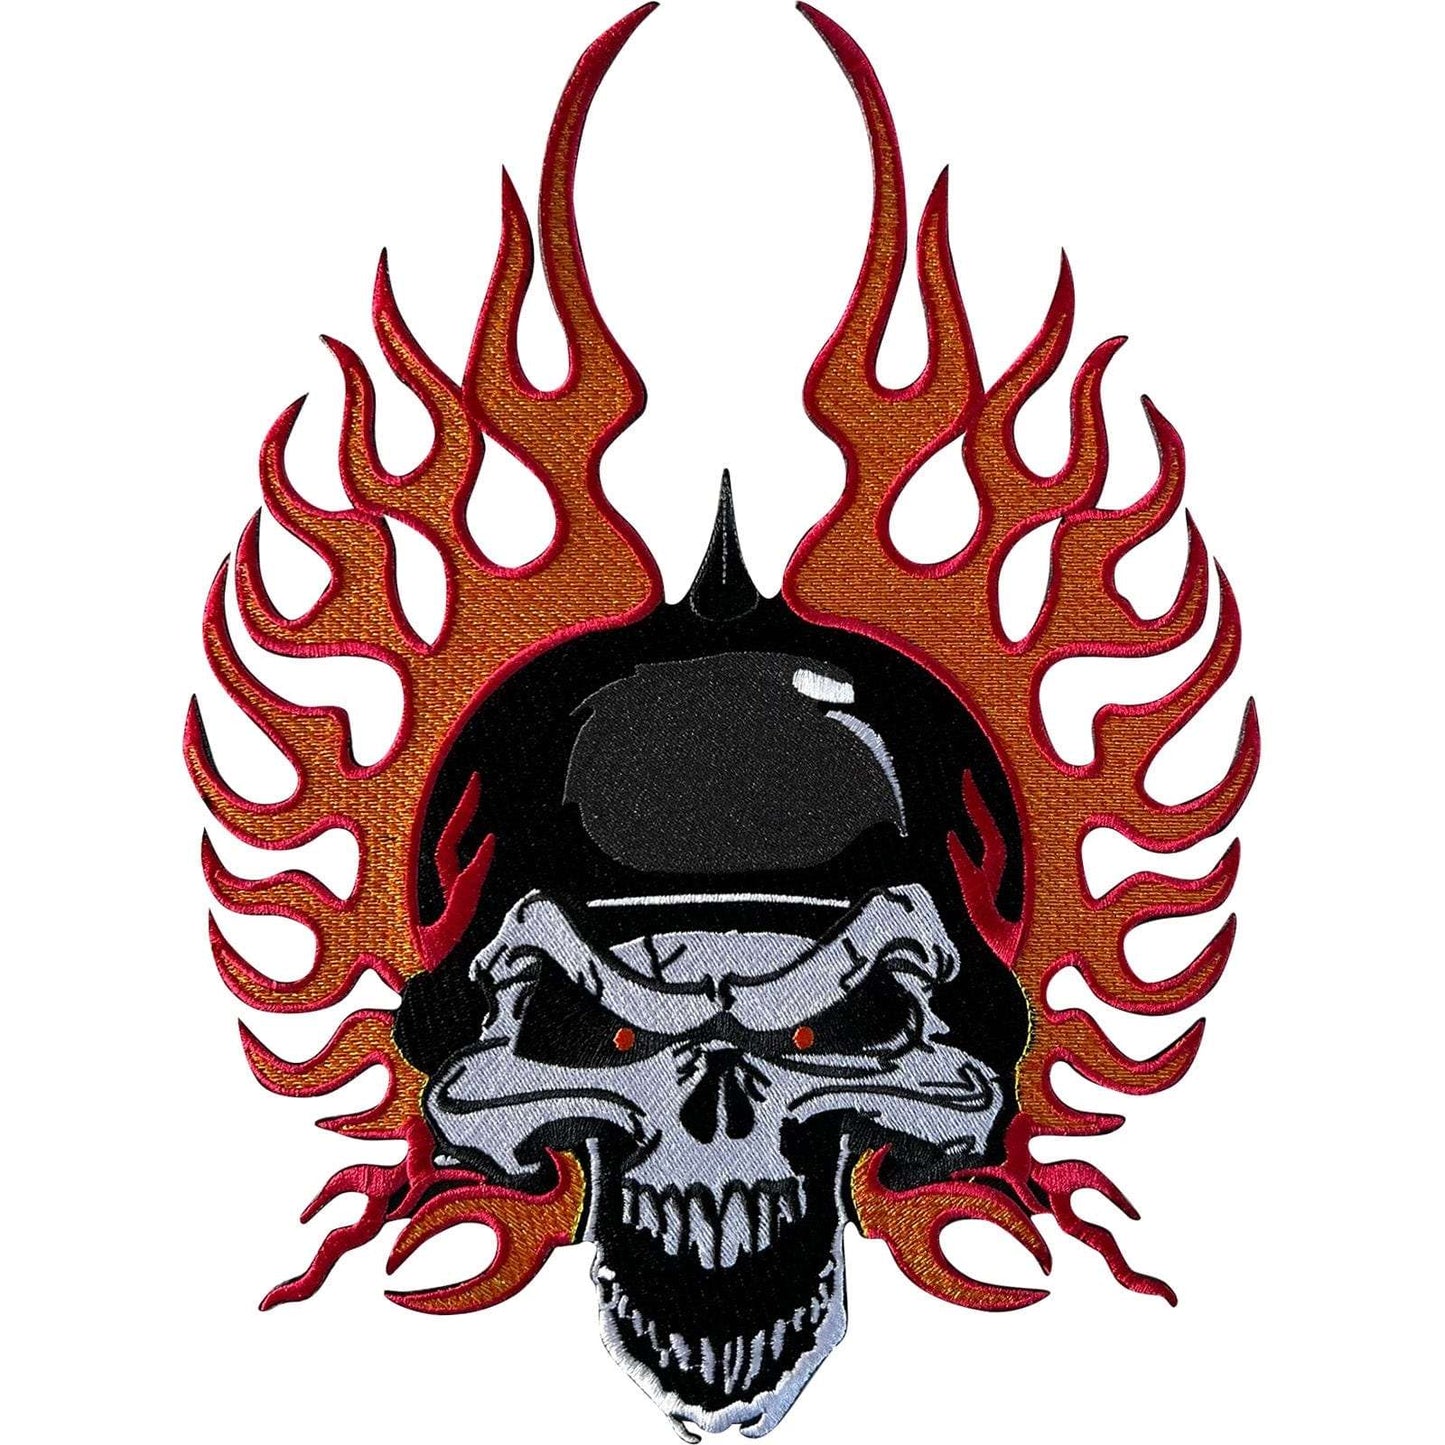 Big Large Fire Skull Patch Iron On Sew On Leather Denim Jacket Embroidered Badge